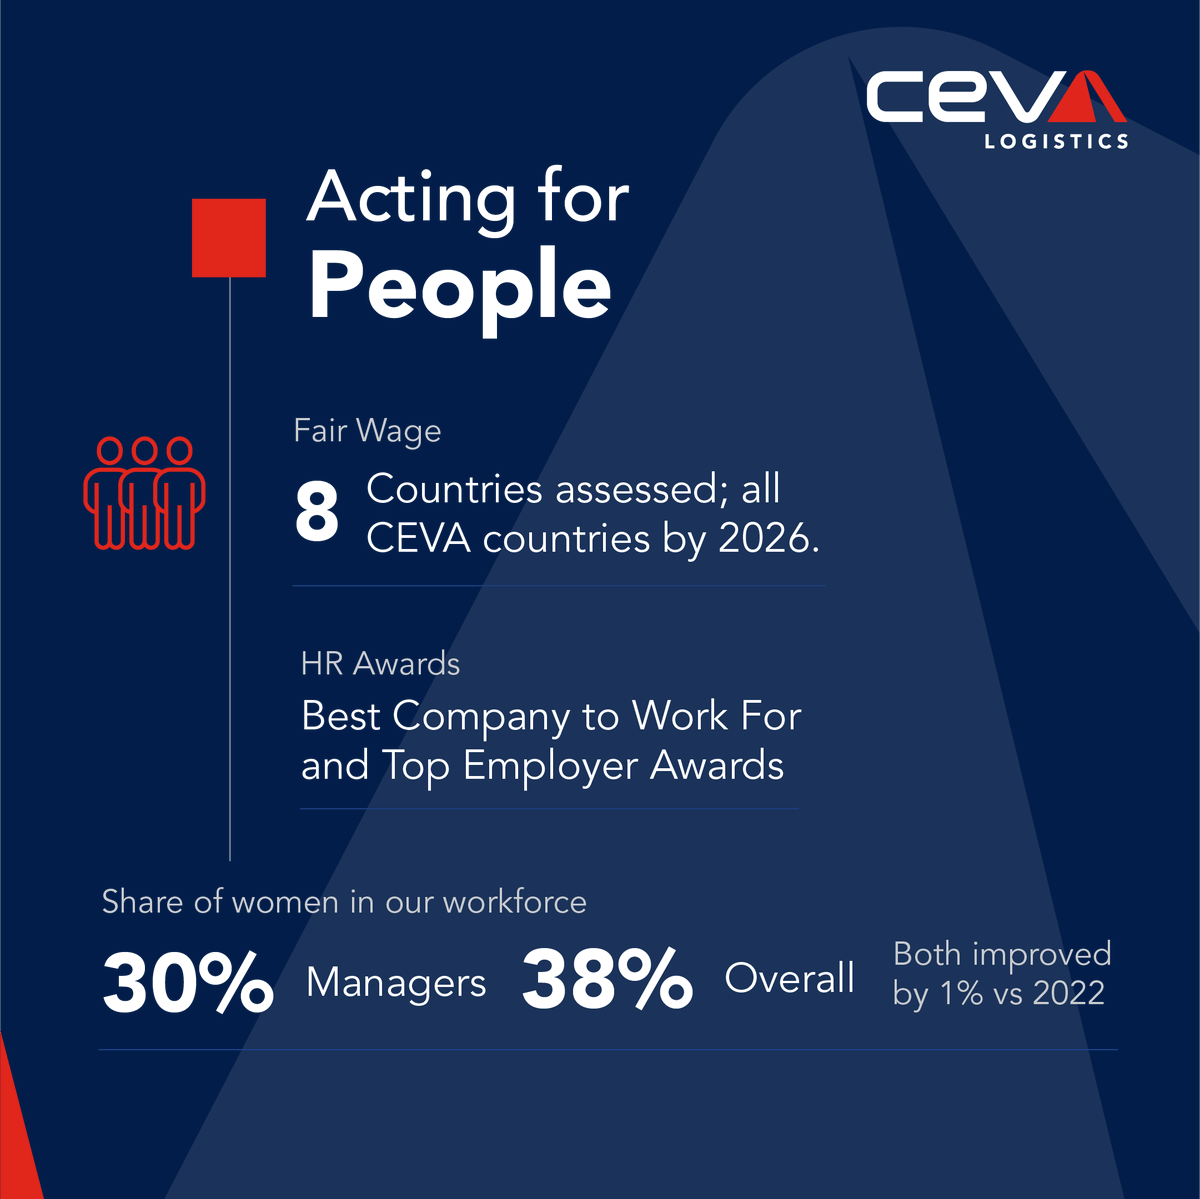 #ActingforPeople In our CSR Summary report, we outline our progress as an Employer of Choice, fostering diversity, equity and inclusion at every level. Read more: cevalogistics.com/en/news-and-me… #CEVALogistics #EmployerOfChoice #WorkplaceWellness #Inclusion #CareerGrowth